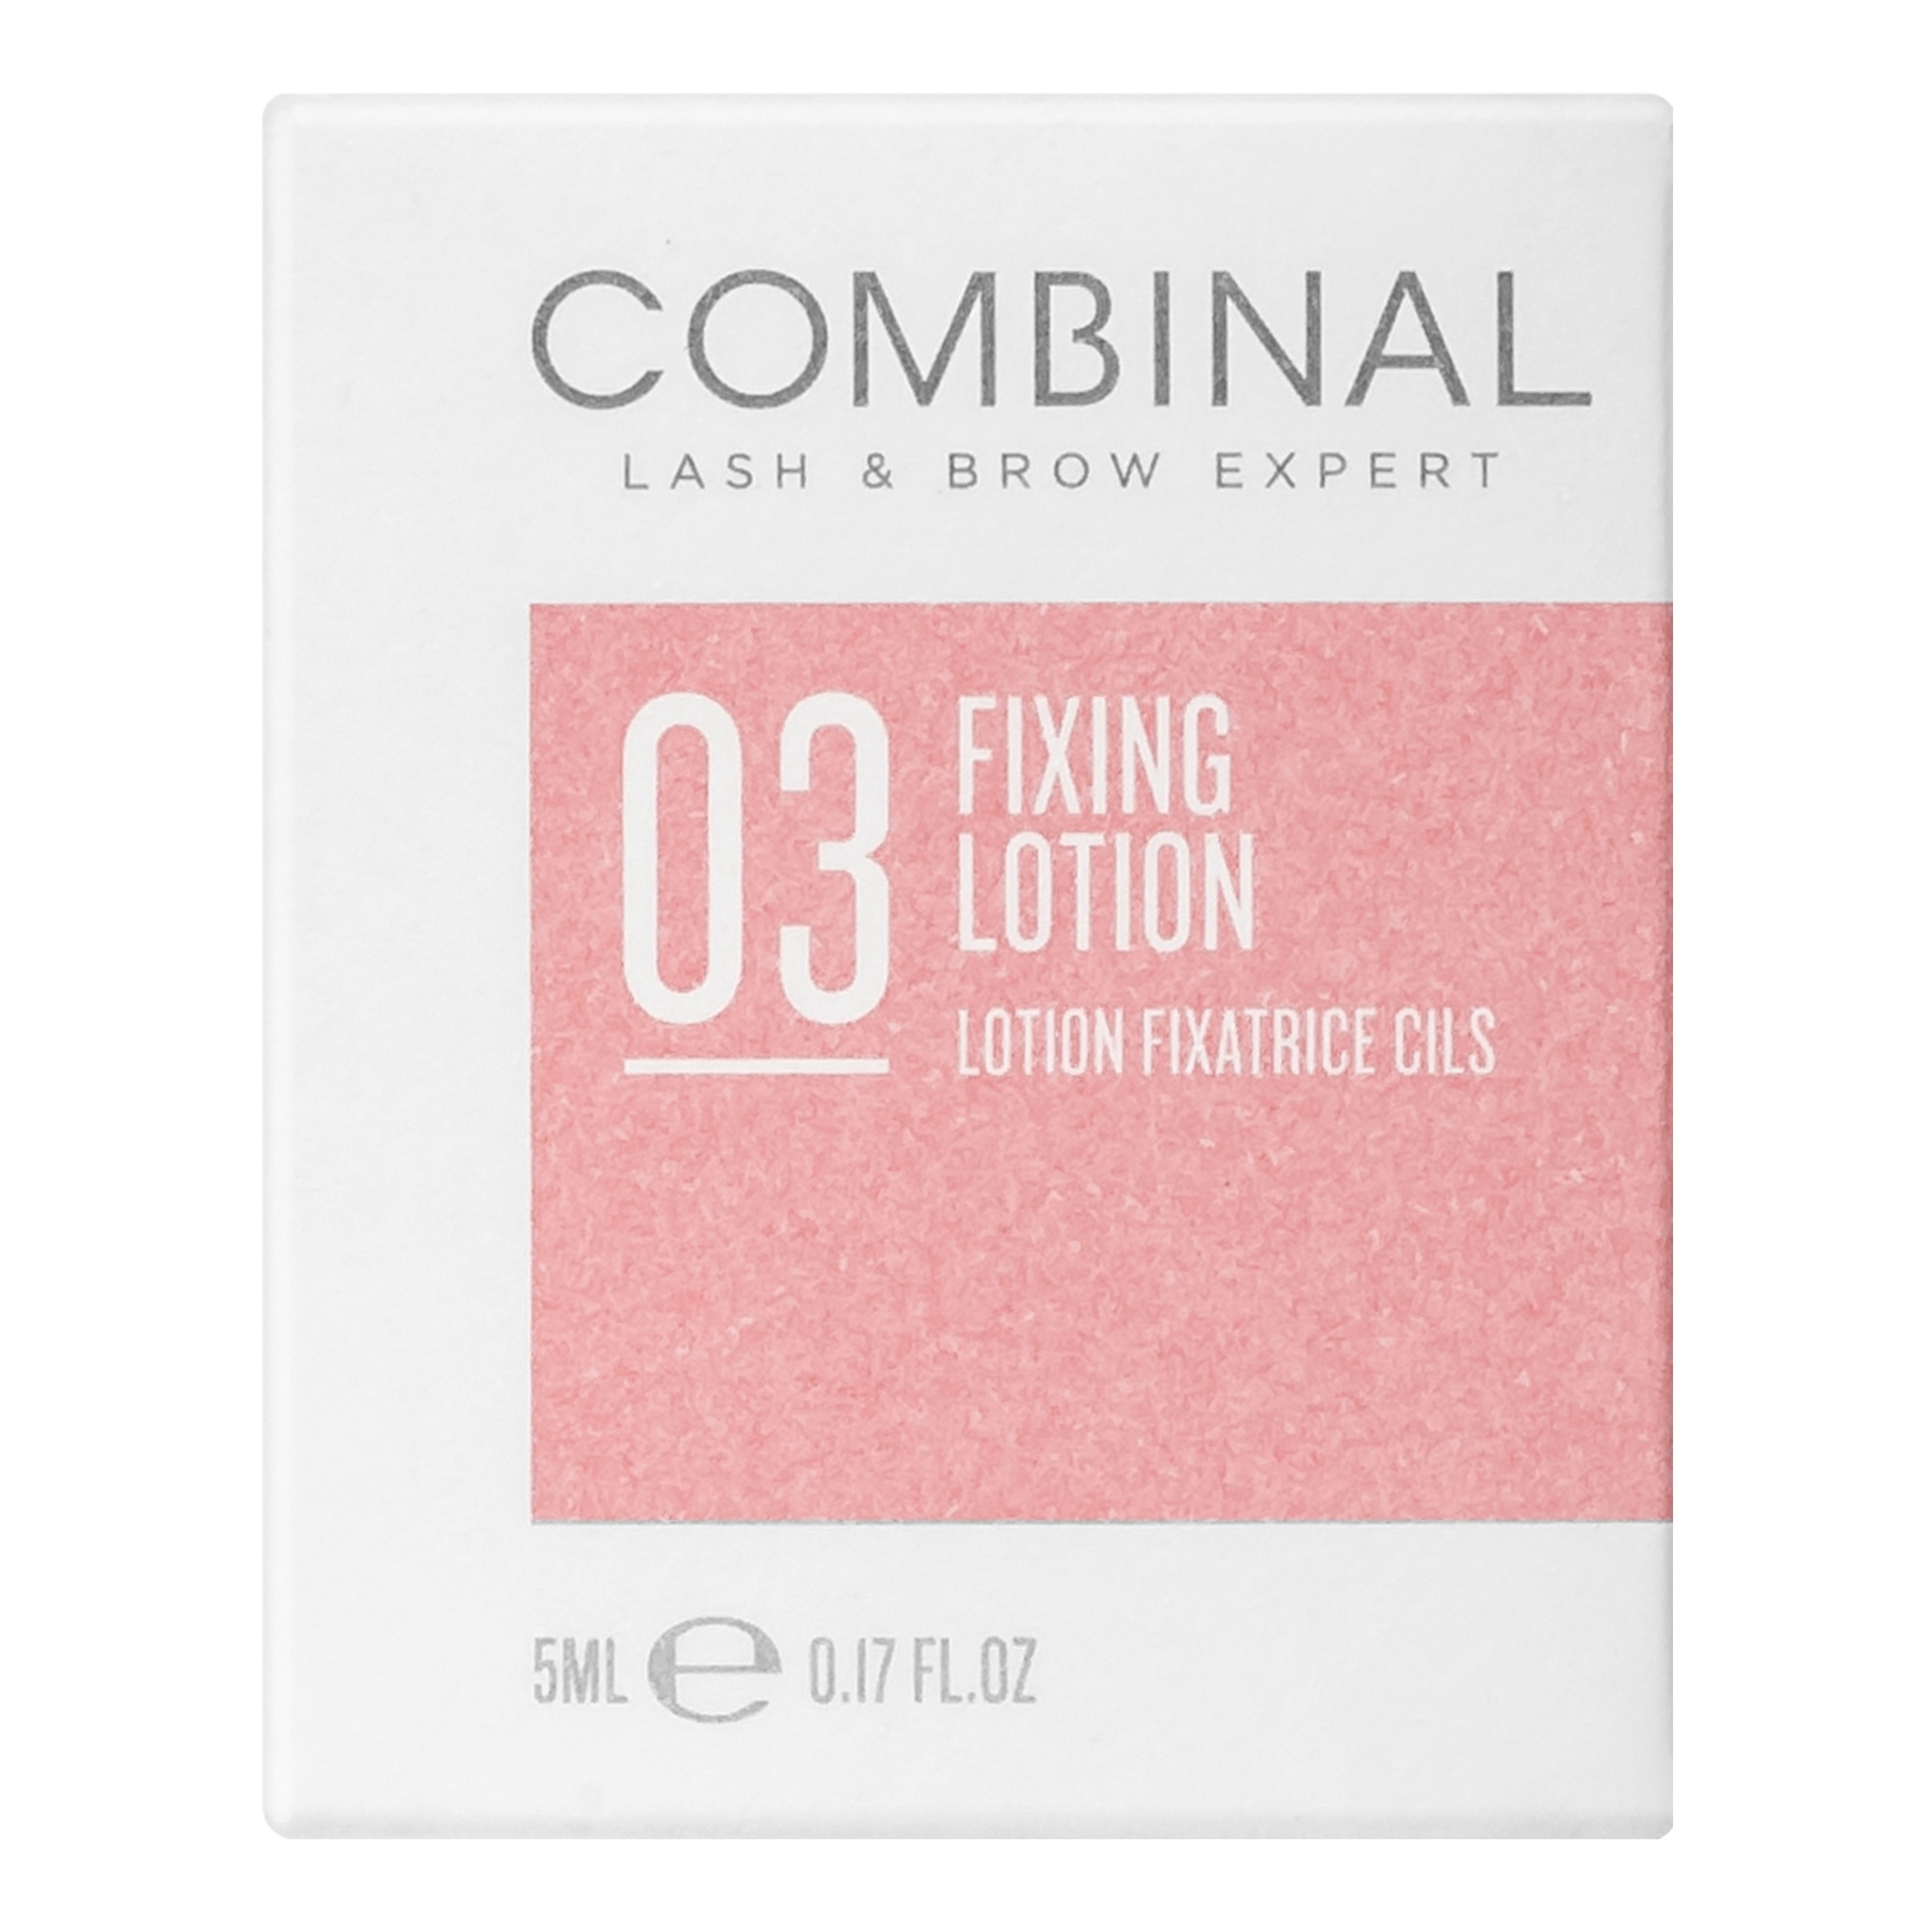 Wimpernlifting-Fixing Lotion 5 ml